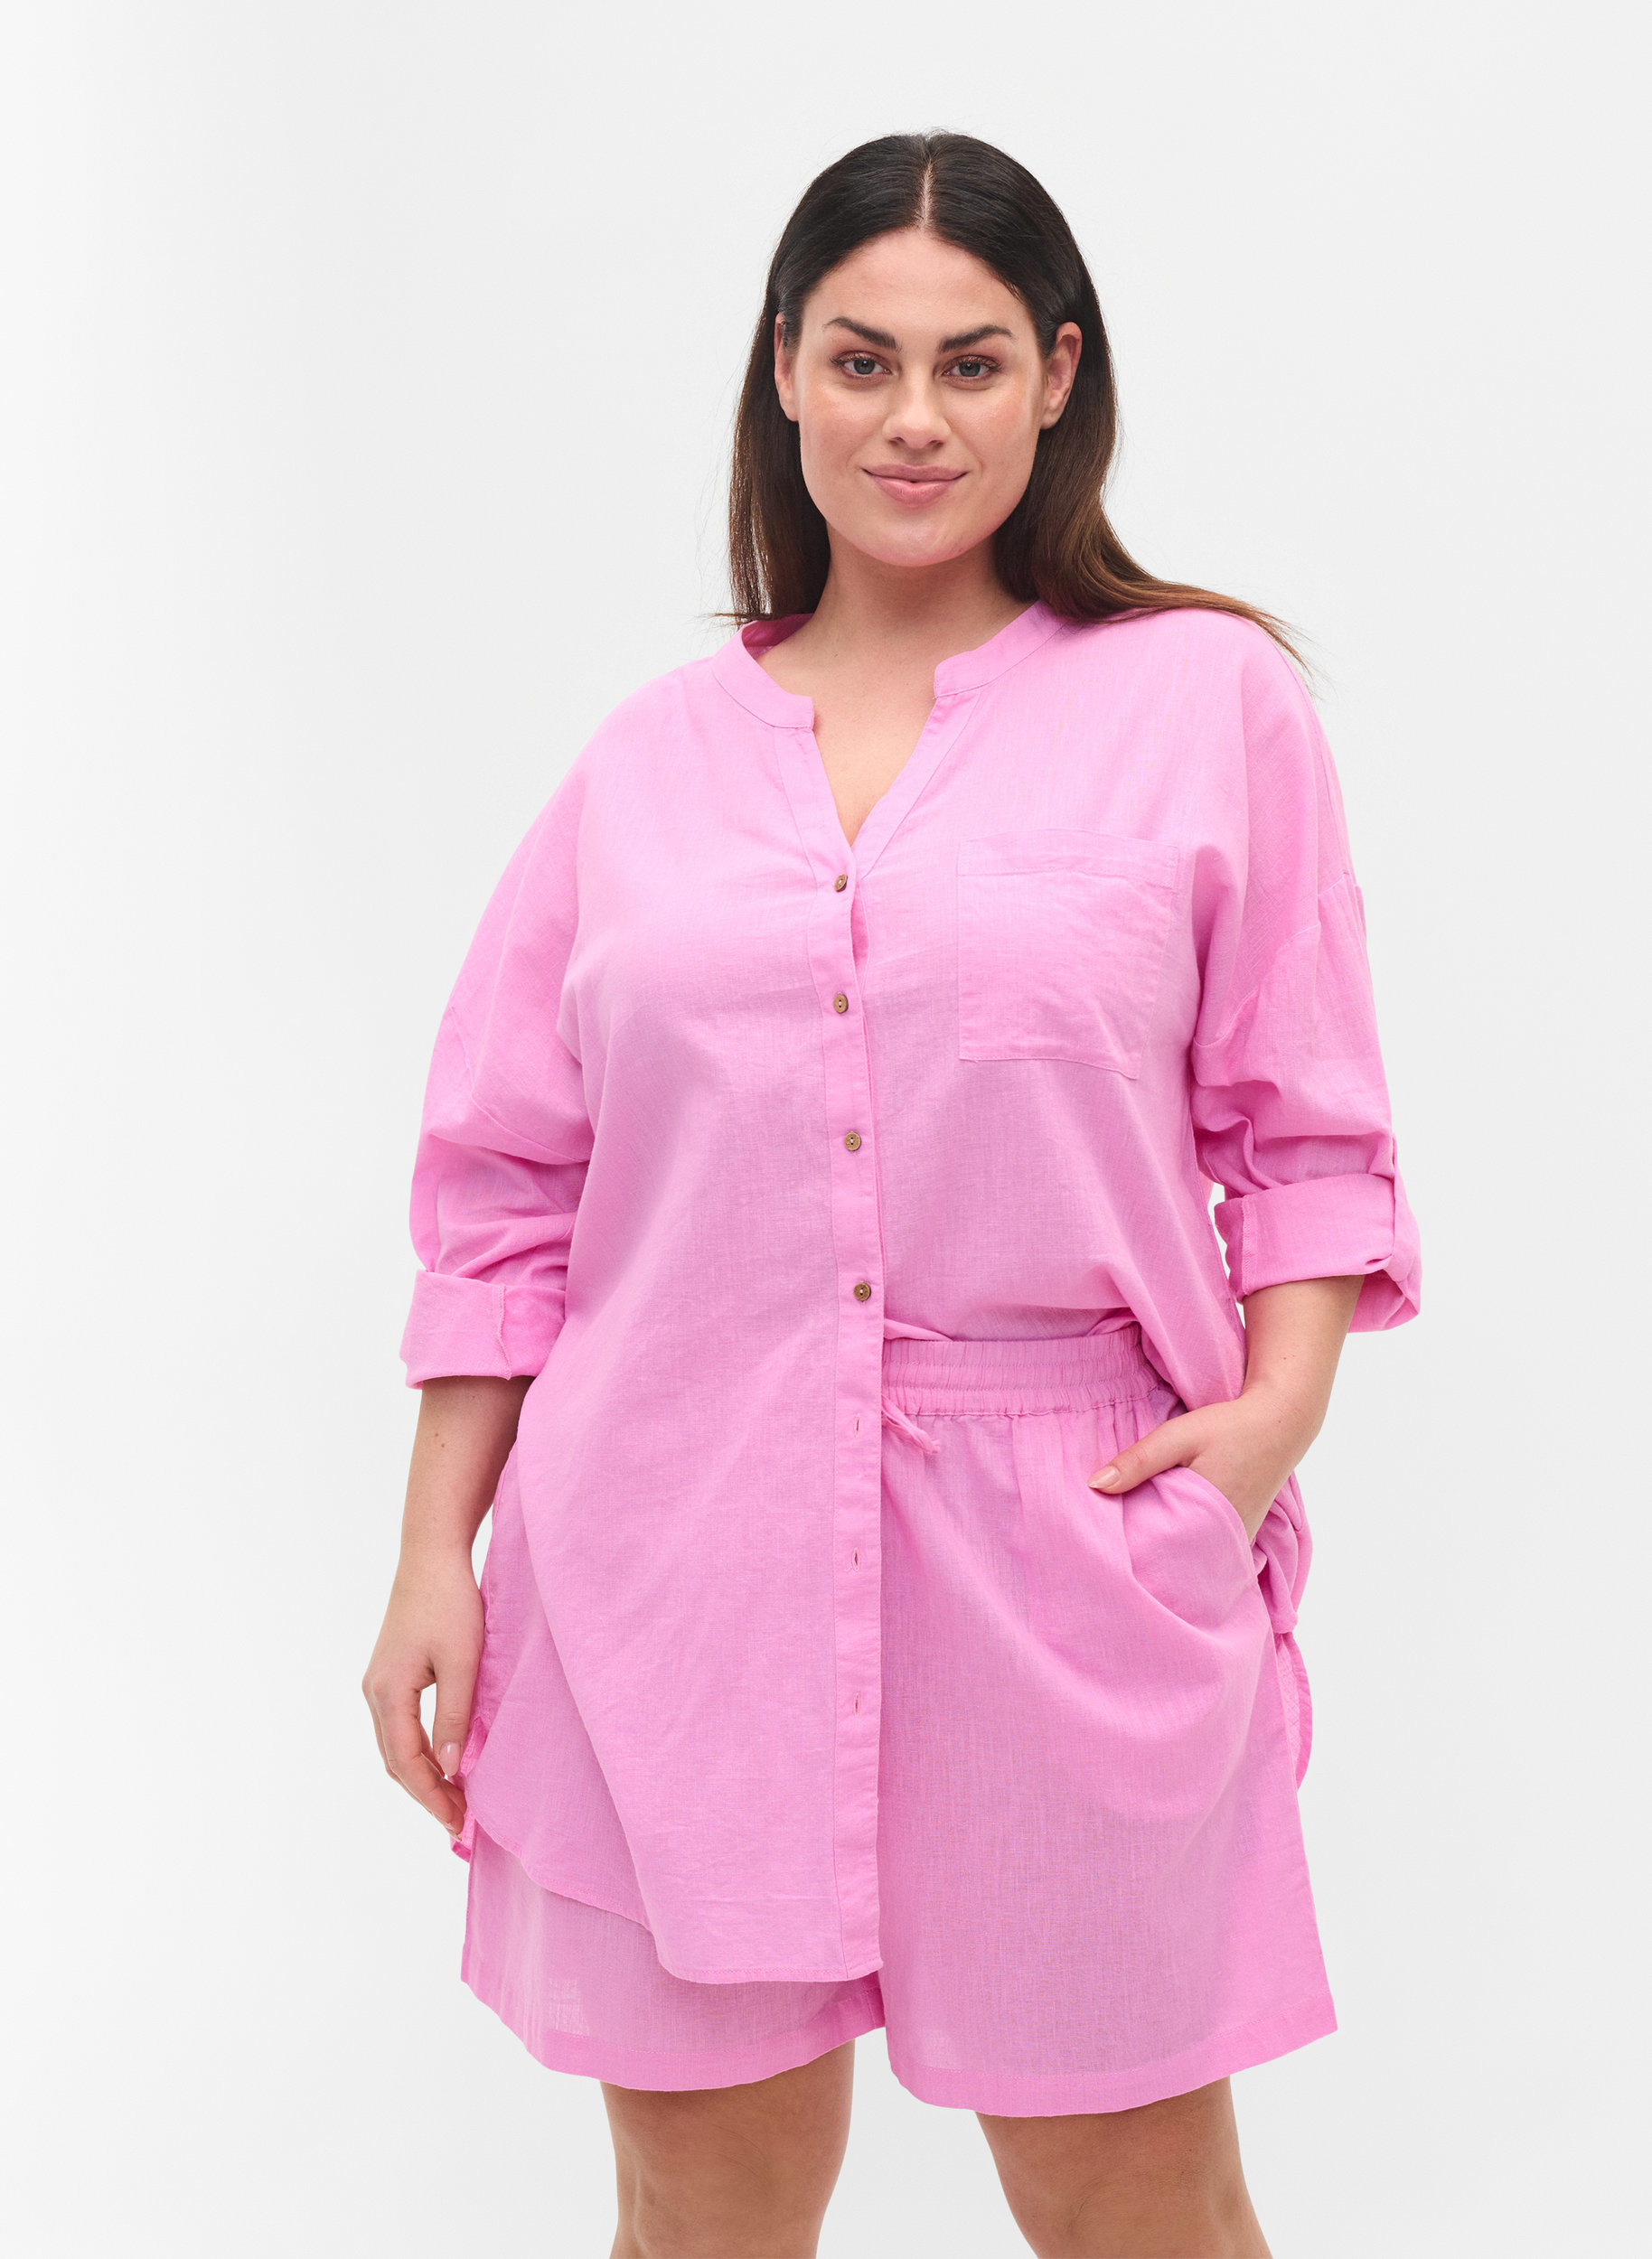 Blouse with 3/4-length sleeves and button closure, Begonia Pink, Model